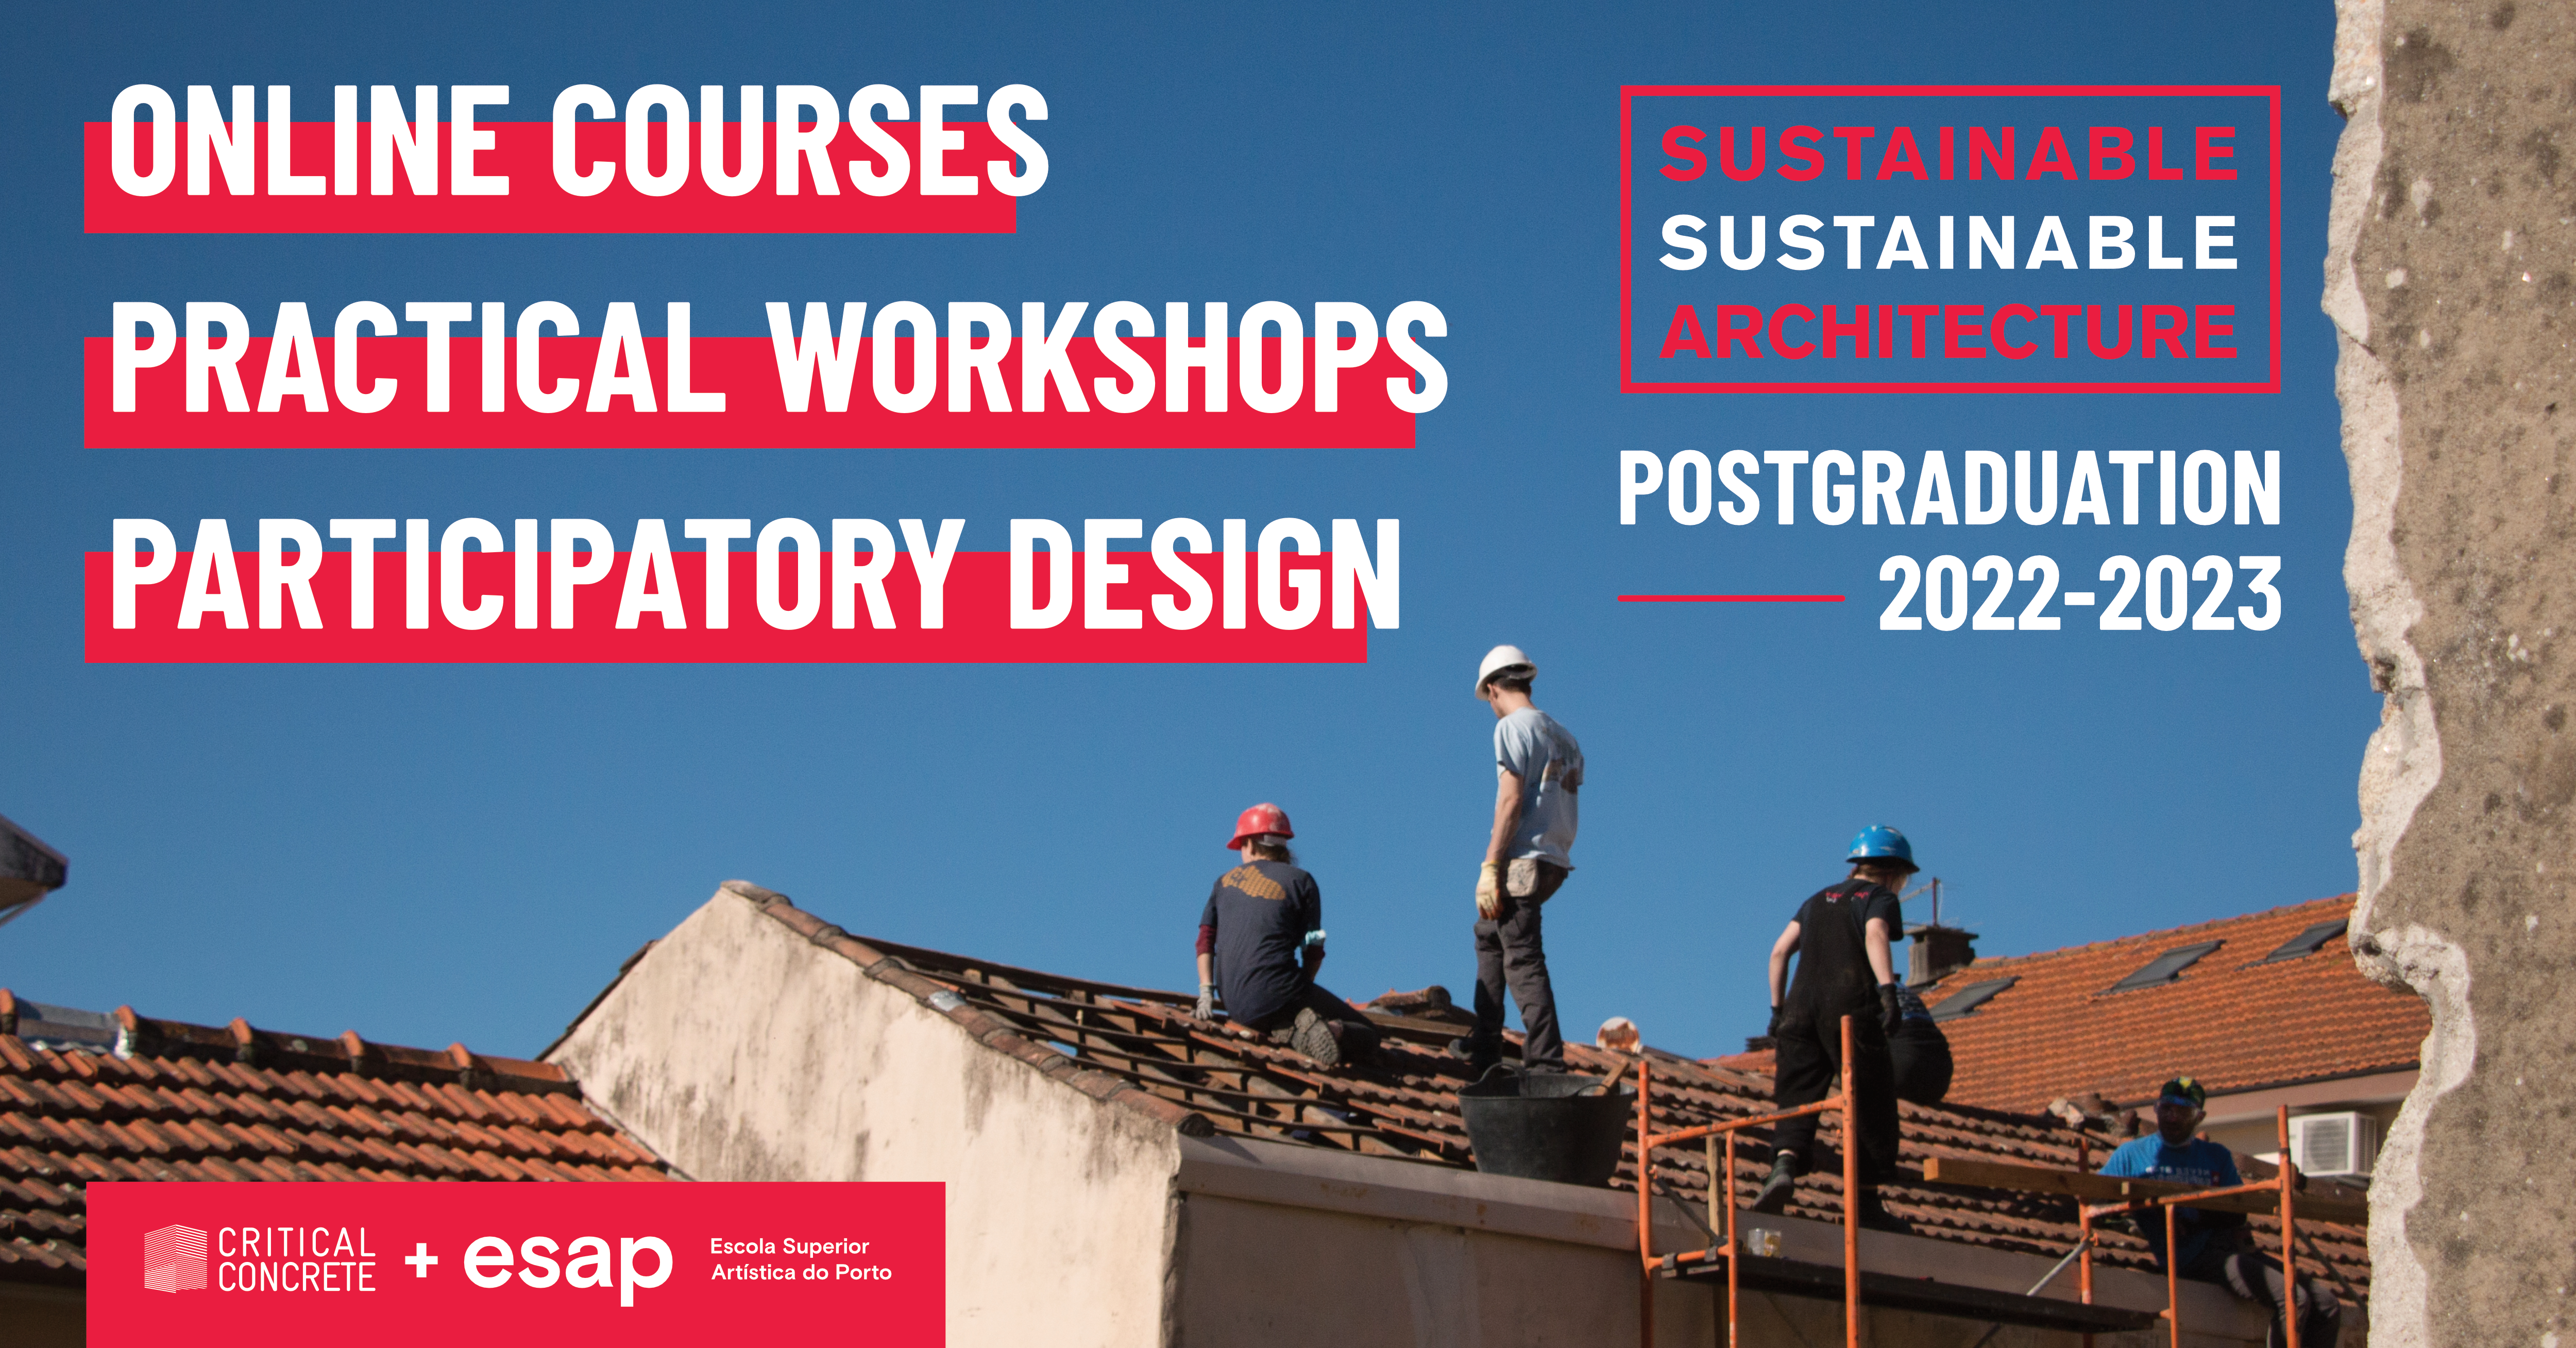 Online courses, practical workshops and participatory design